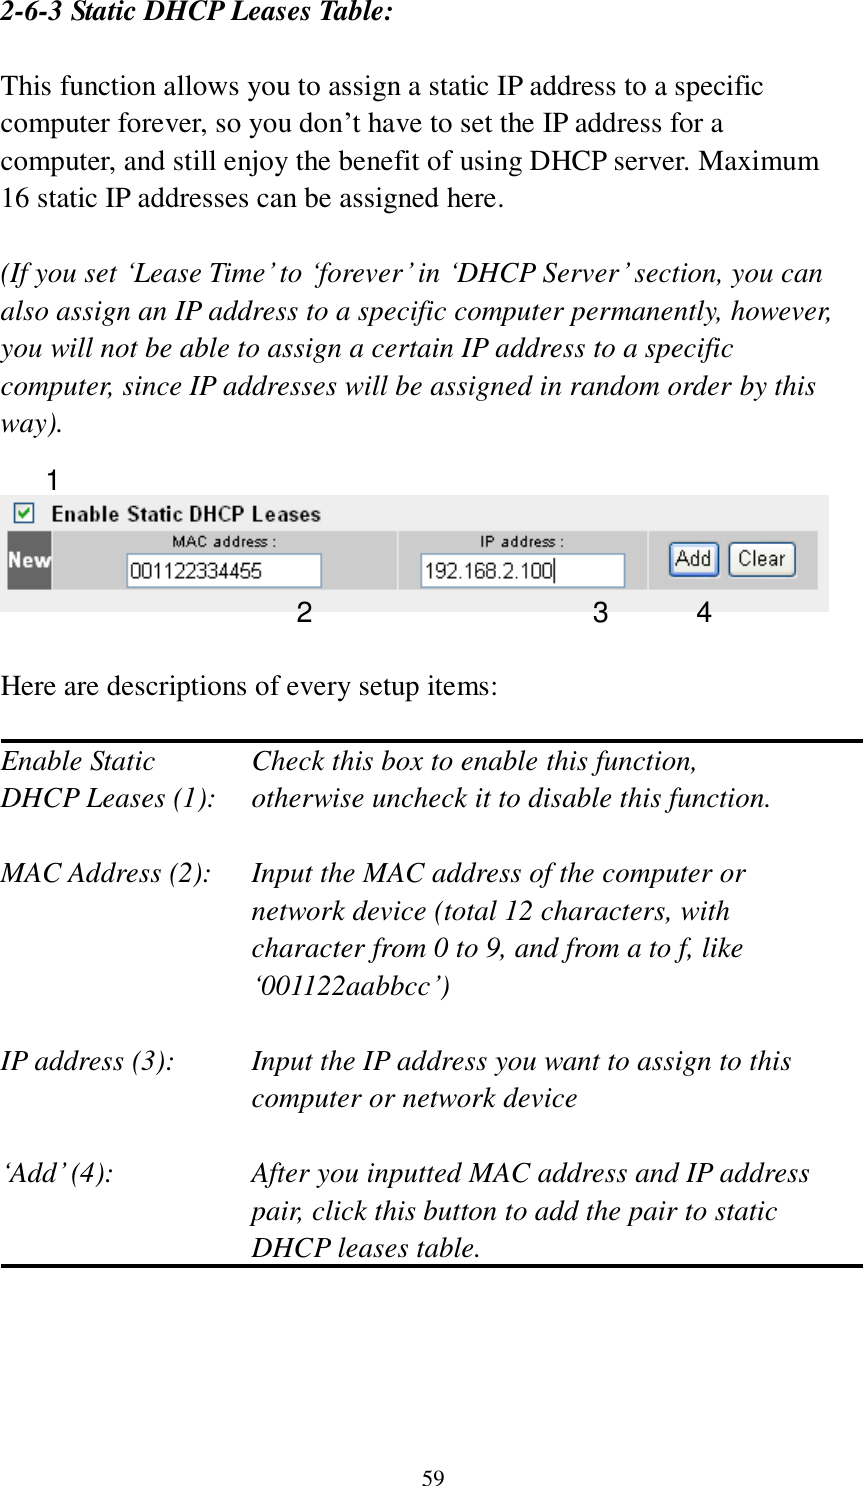 59 2-6-3 Static DHCP Leases Table:  This function allows you to assign a static IP address to a specific computer forever, so you don‟t have to set the IP address for a computer, and still enjoy the benefit of using DHCP server. Maximum 16 static IP addresses can be assigned here.  (If you set „Lease Time‟ to „forever‟ in „DHCP Server‟ section, you can also assign an IP address to a specific computer permanently, however, you will not be able to assign a certain IP address to a specific computer, since IP addresses will be assigned in random order by this way).      Here are descriptions of every setup items:  Enable Static      Check this box to enable this function, DHCP Leases (1):    otherwise uncheck it to disable this function.  MAC Address (2):    Input the MAC address of the computer or network device (total 12 characters, with character from 0 to 9, and from a to f, like „001122aabbcc‟)    IP address (3):    Input the IP address you want to assign to this computer or network device    „Add‟ (4):    After you inputted MAC address and IP address pair, click this button to add the pair to static DHCP leases table.     1 2 3 4 